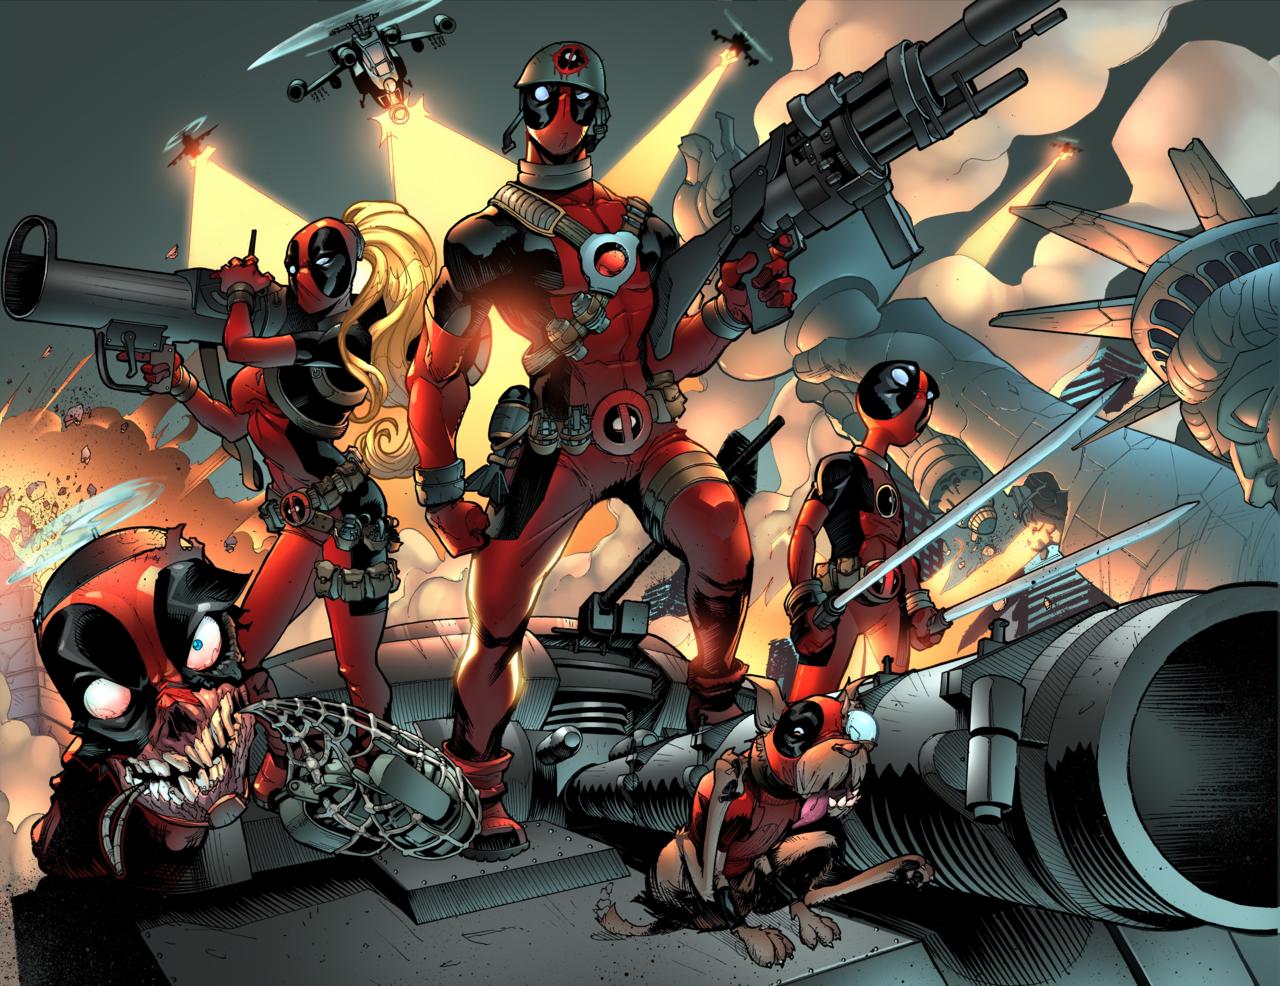 With the Deadpool Corps